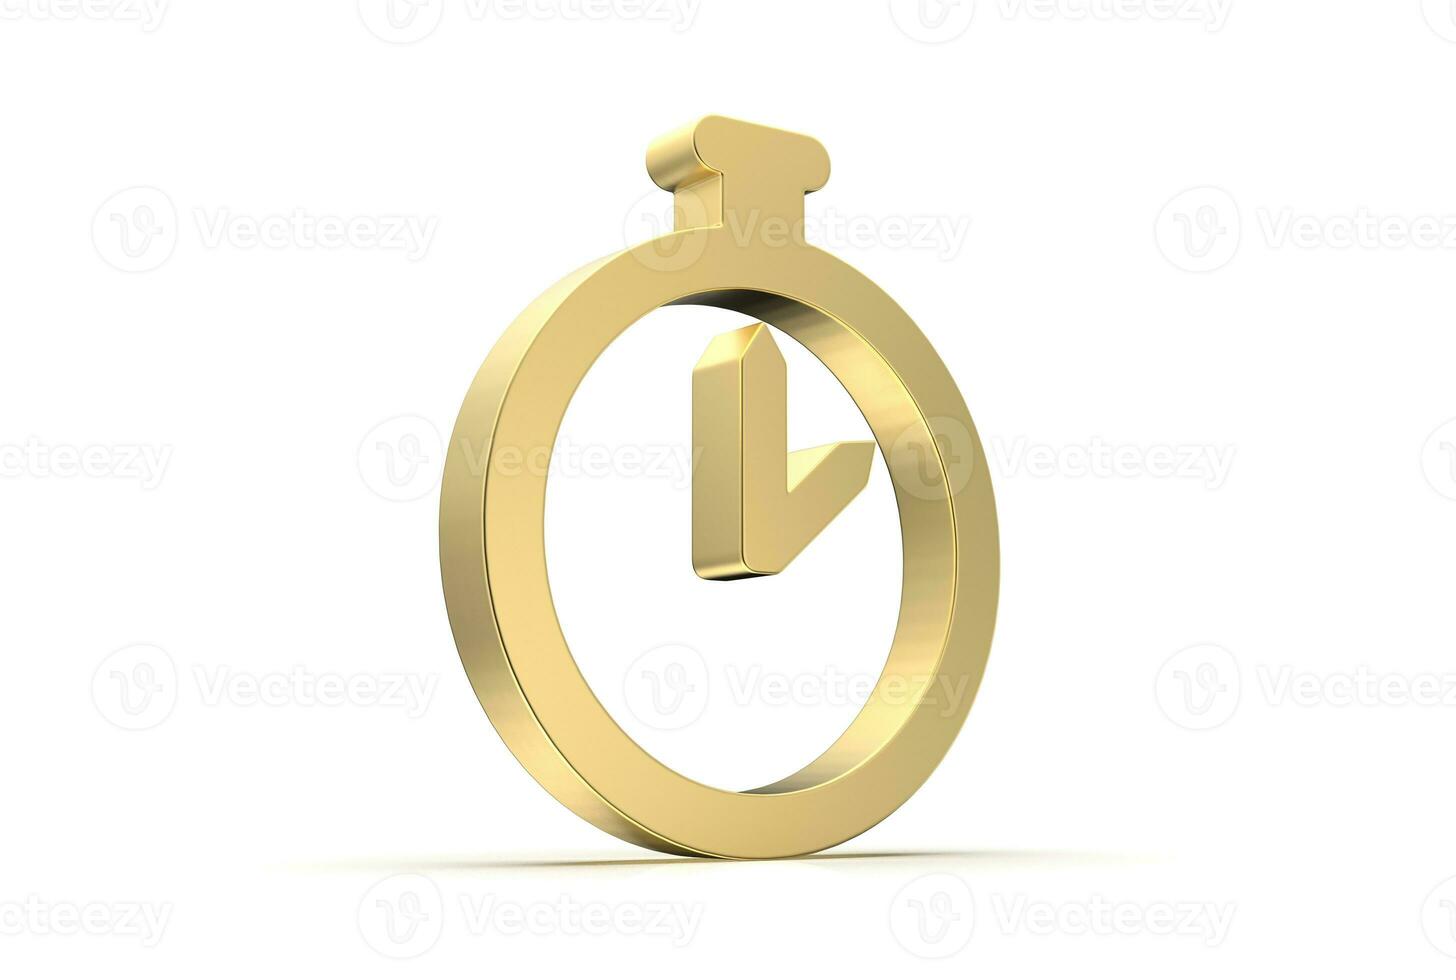 Stopwatch icon 3d rendered isolated on white background with shadow photo